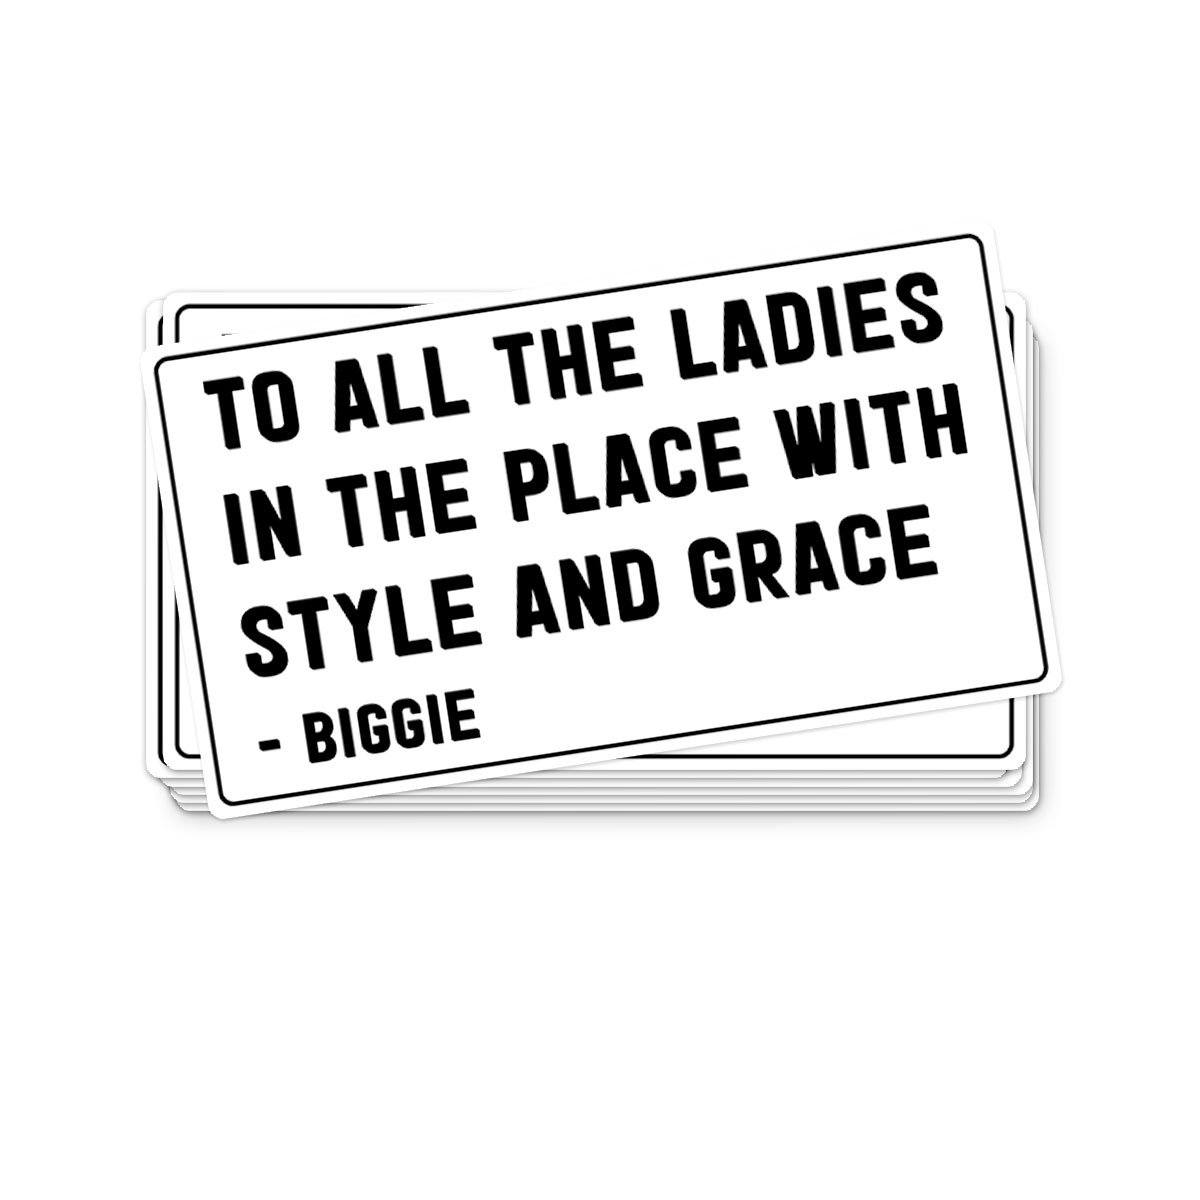 STYLE AND GRACE STICKER